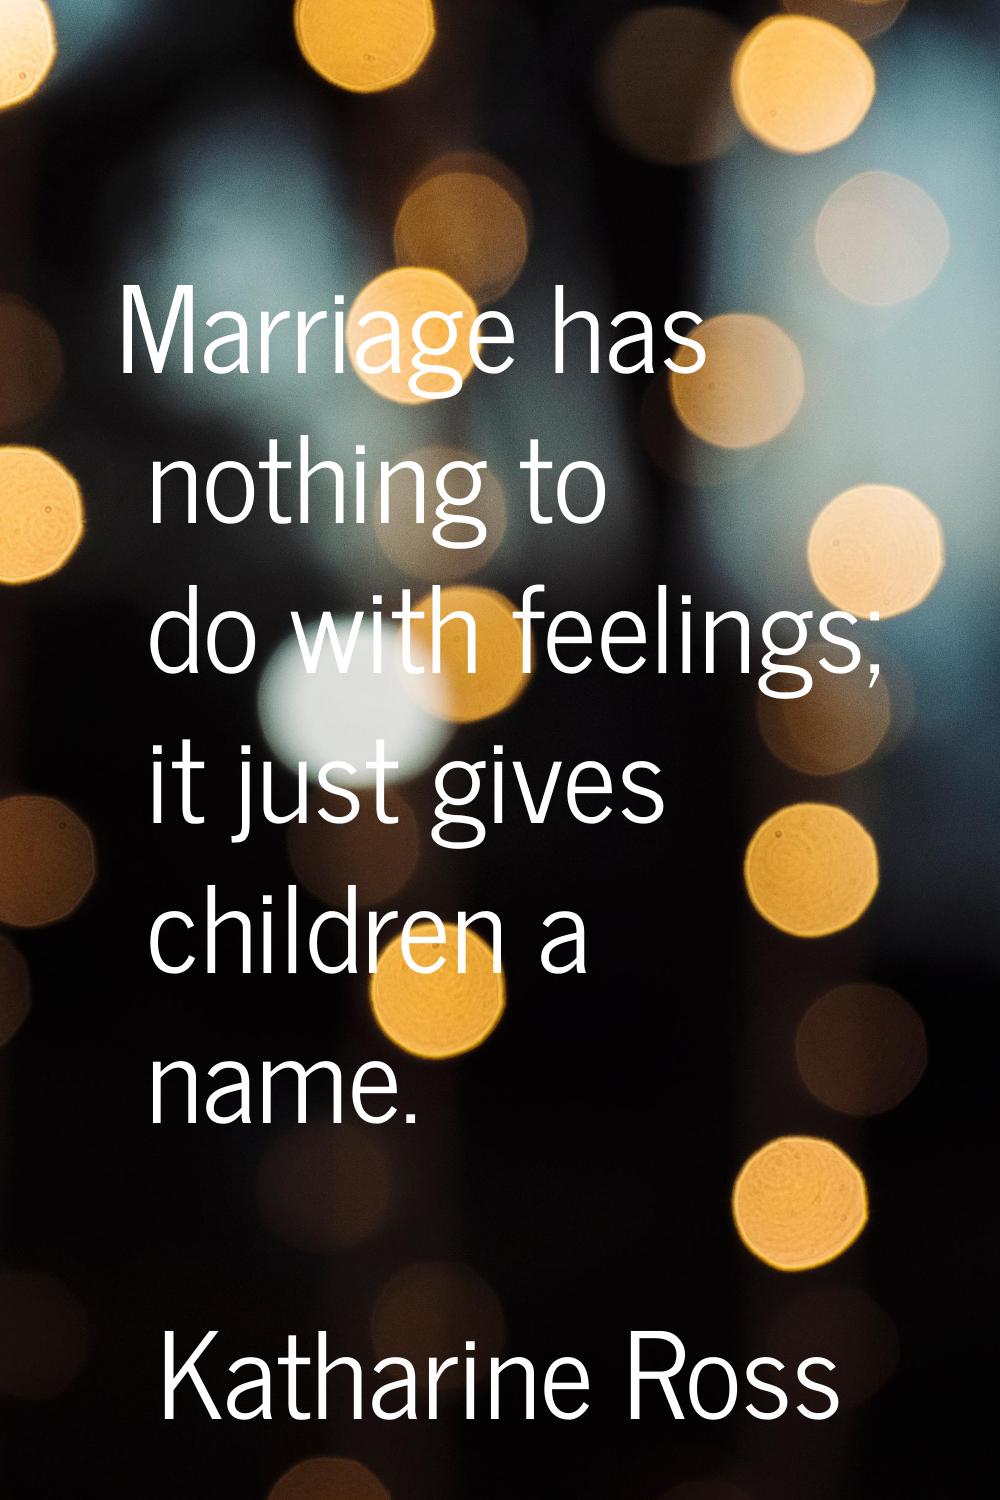 Marriage has nothing to do with feelings; it just gives children a name.